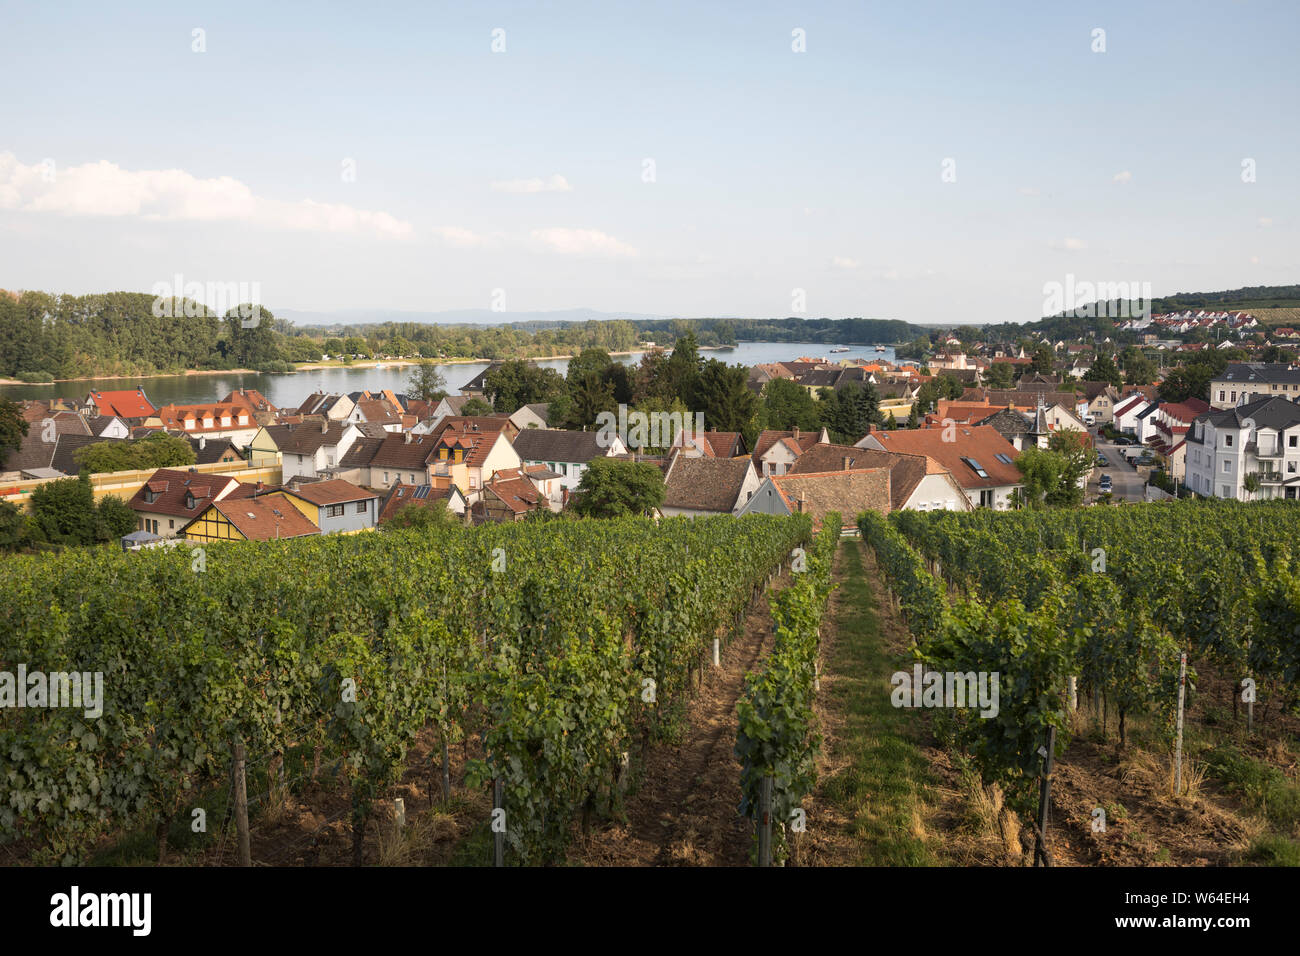 View on the town of Nierstein, Germany with a vineyard and grapes in front and the river Rhine in the background Stock Photo